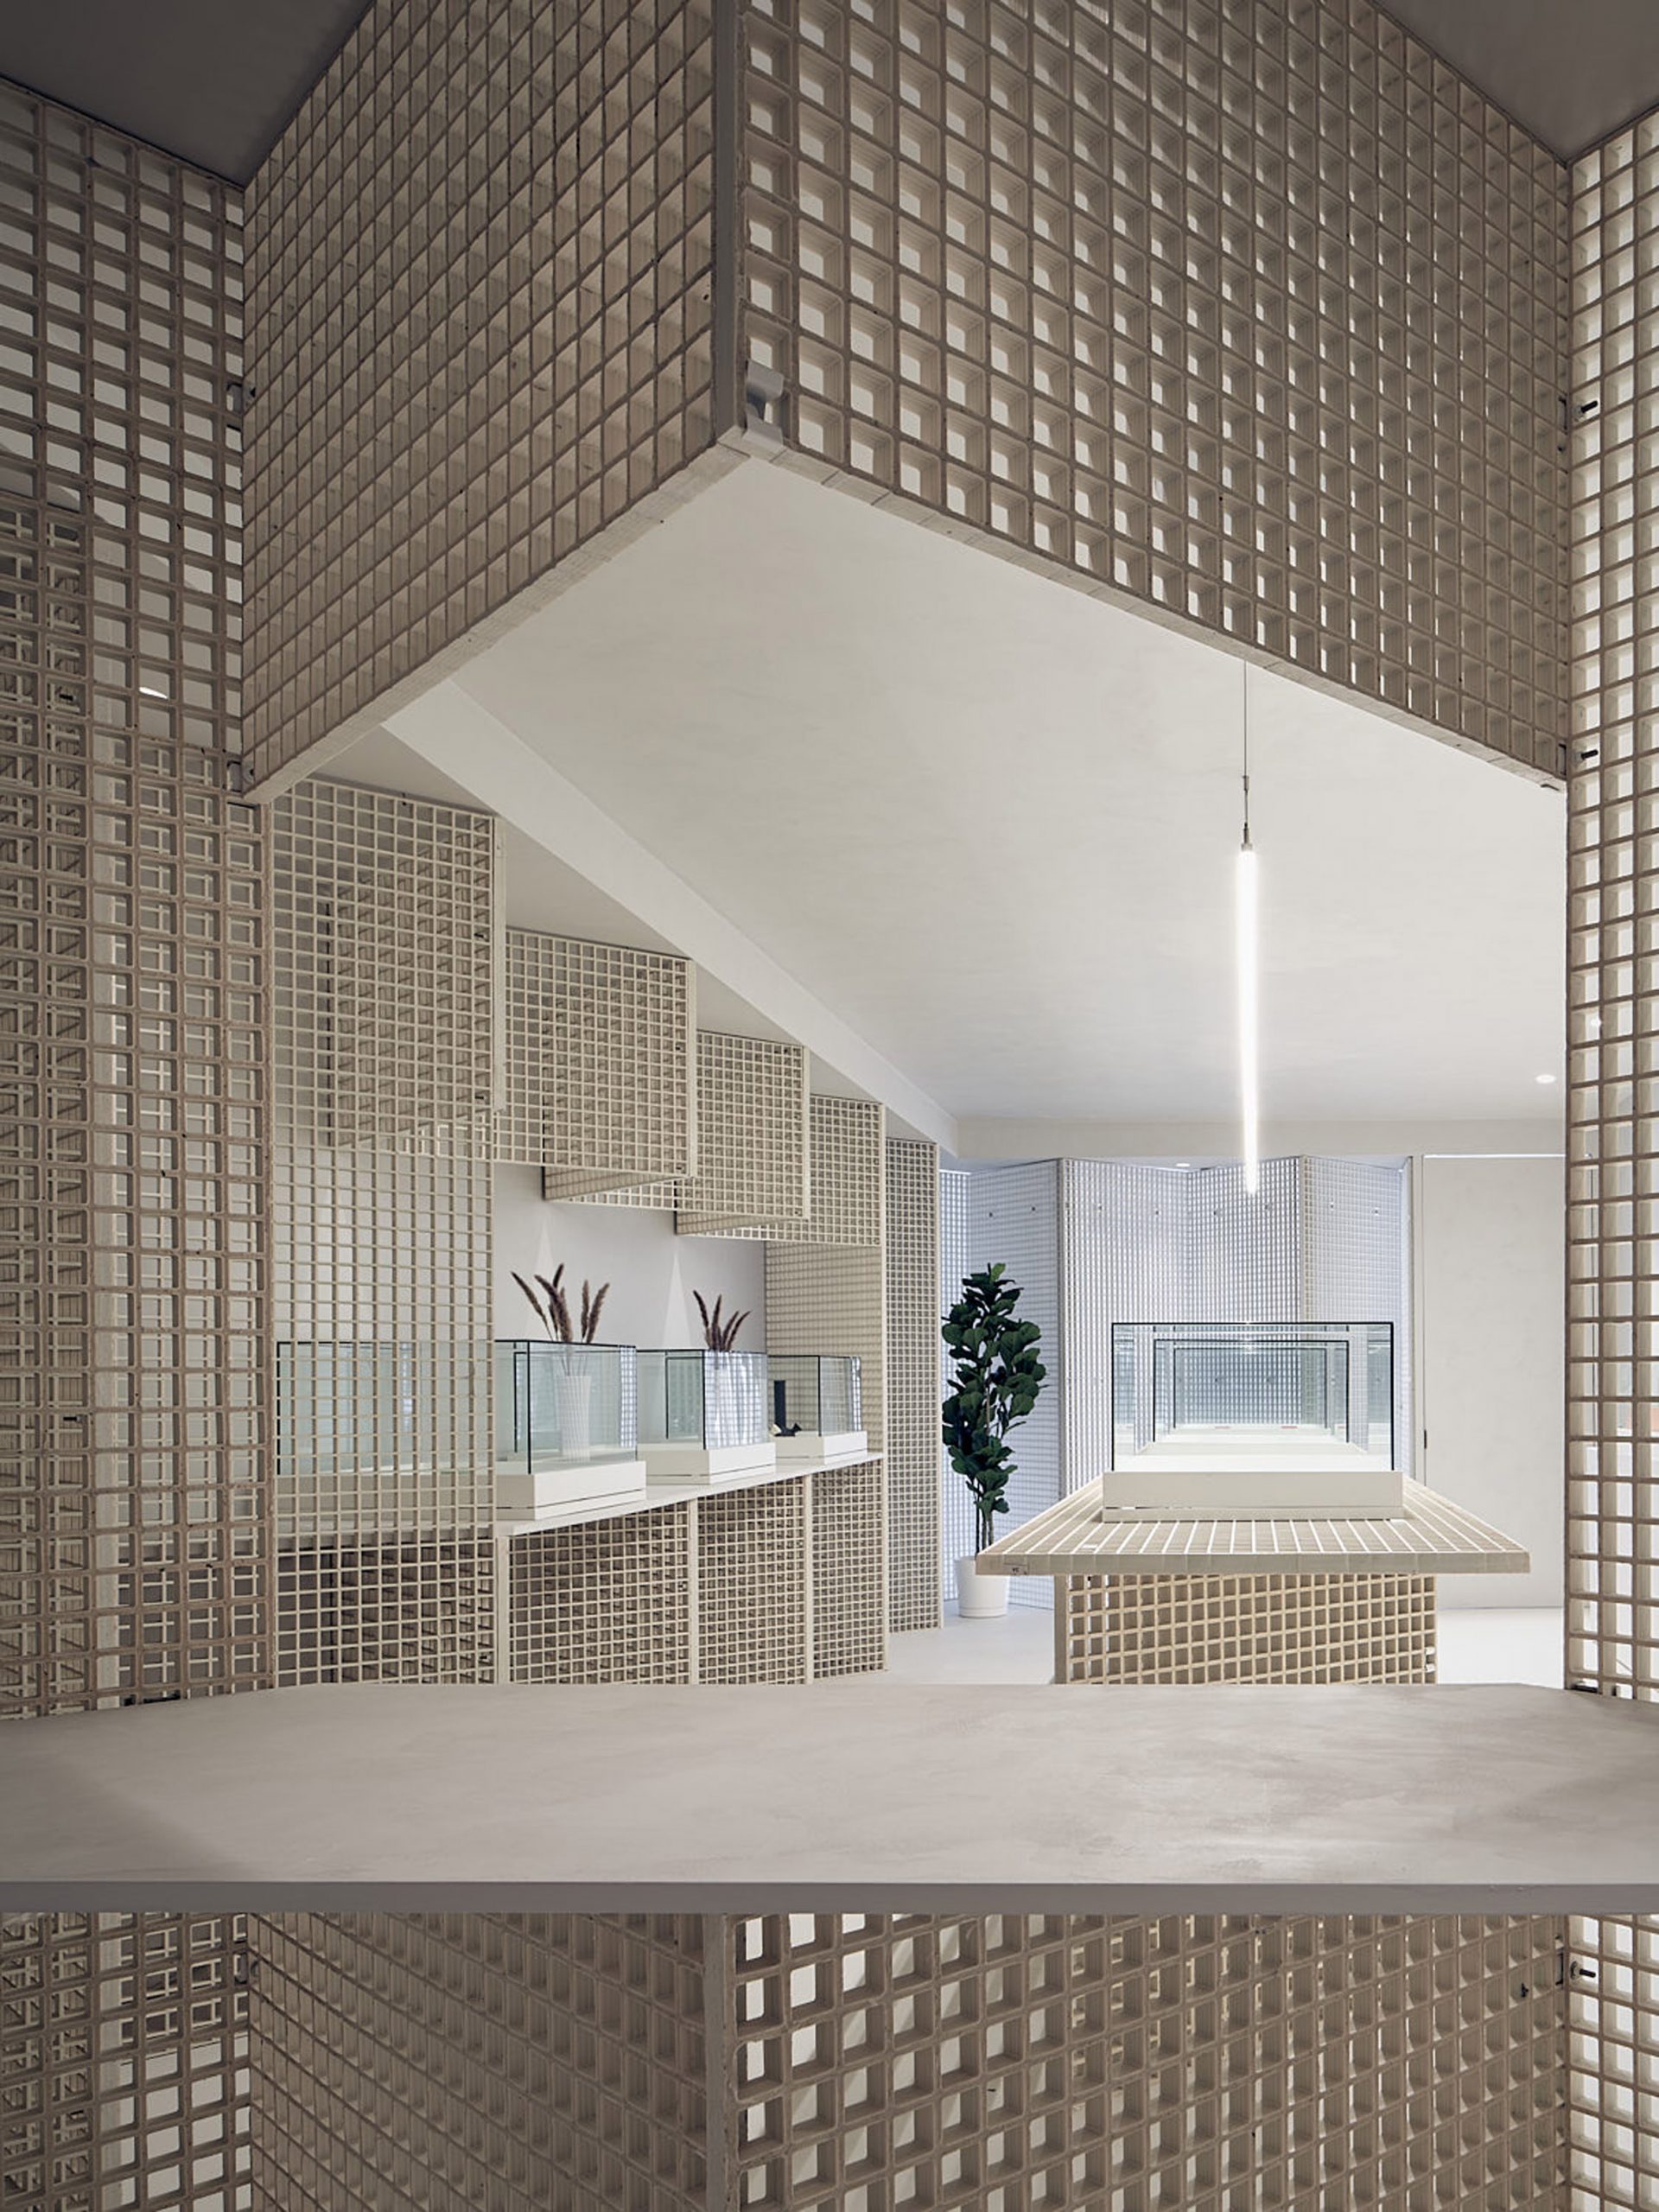 Walls and counter clad in industrial grating by StudioAC